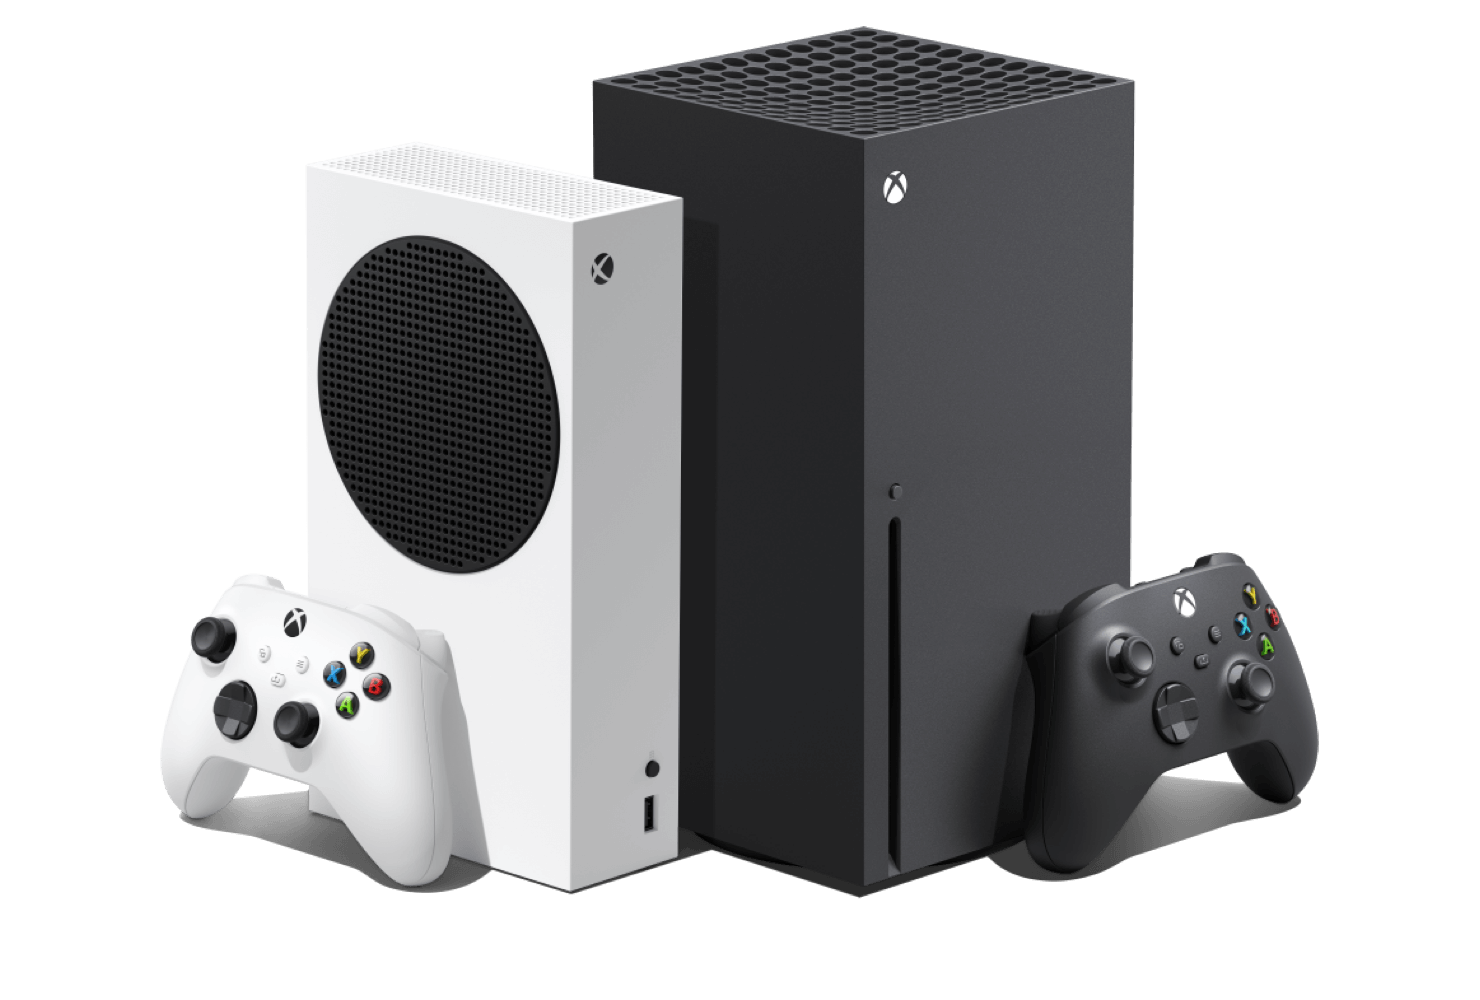 Order your Xbox Series S with over 100+ games